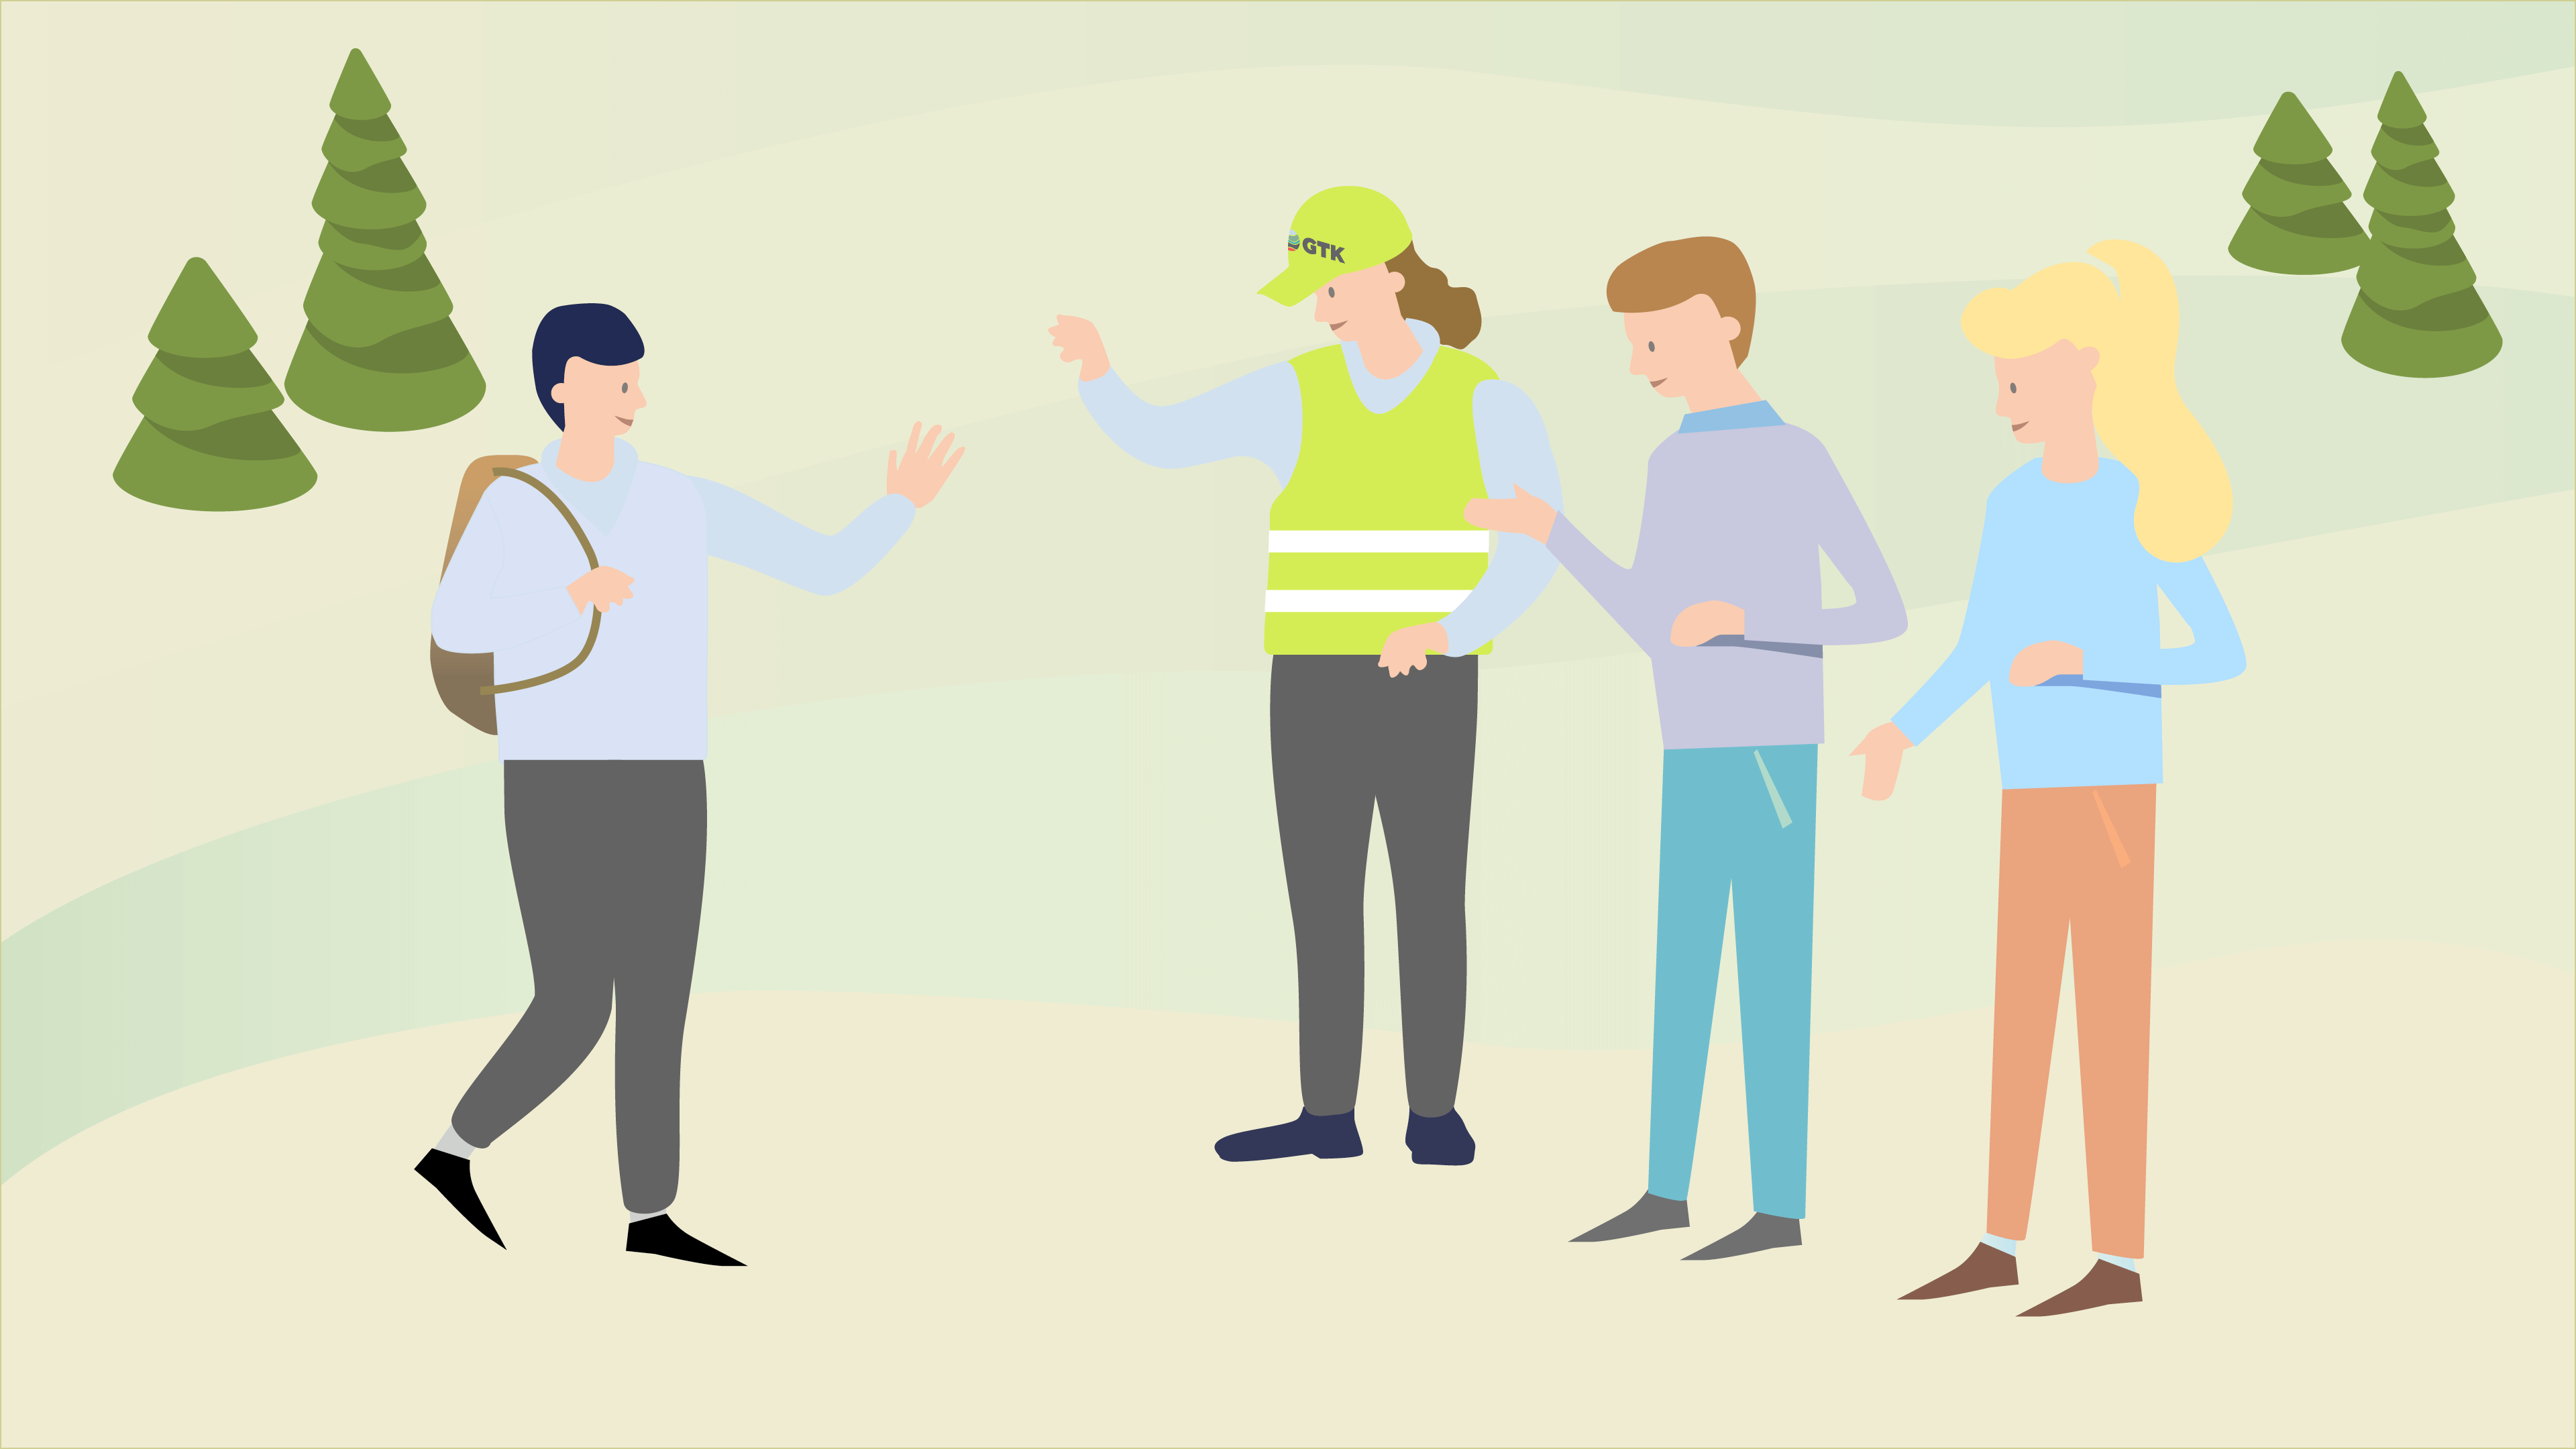 Drawing of a person arriving to other people greeting them